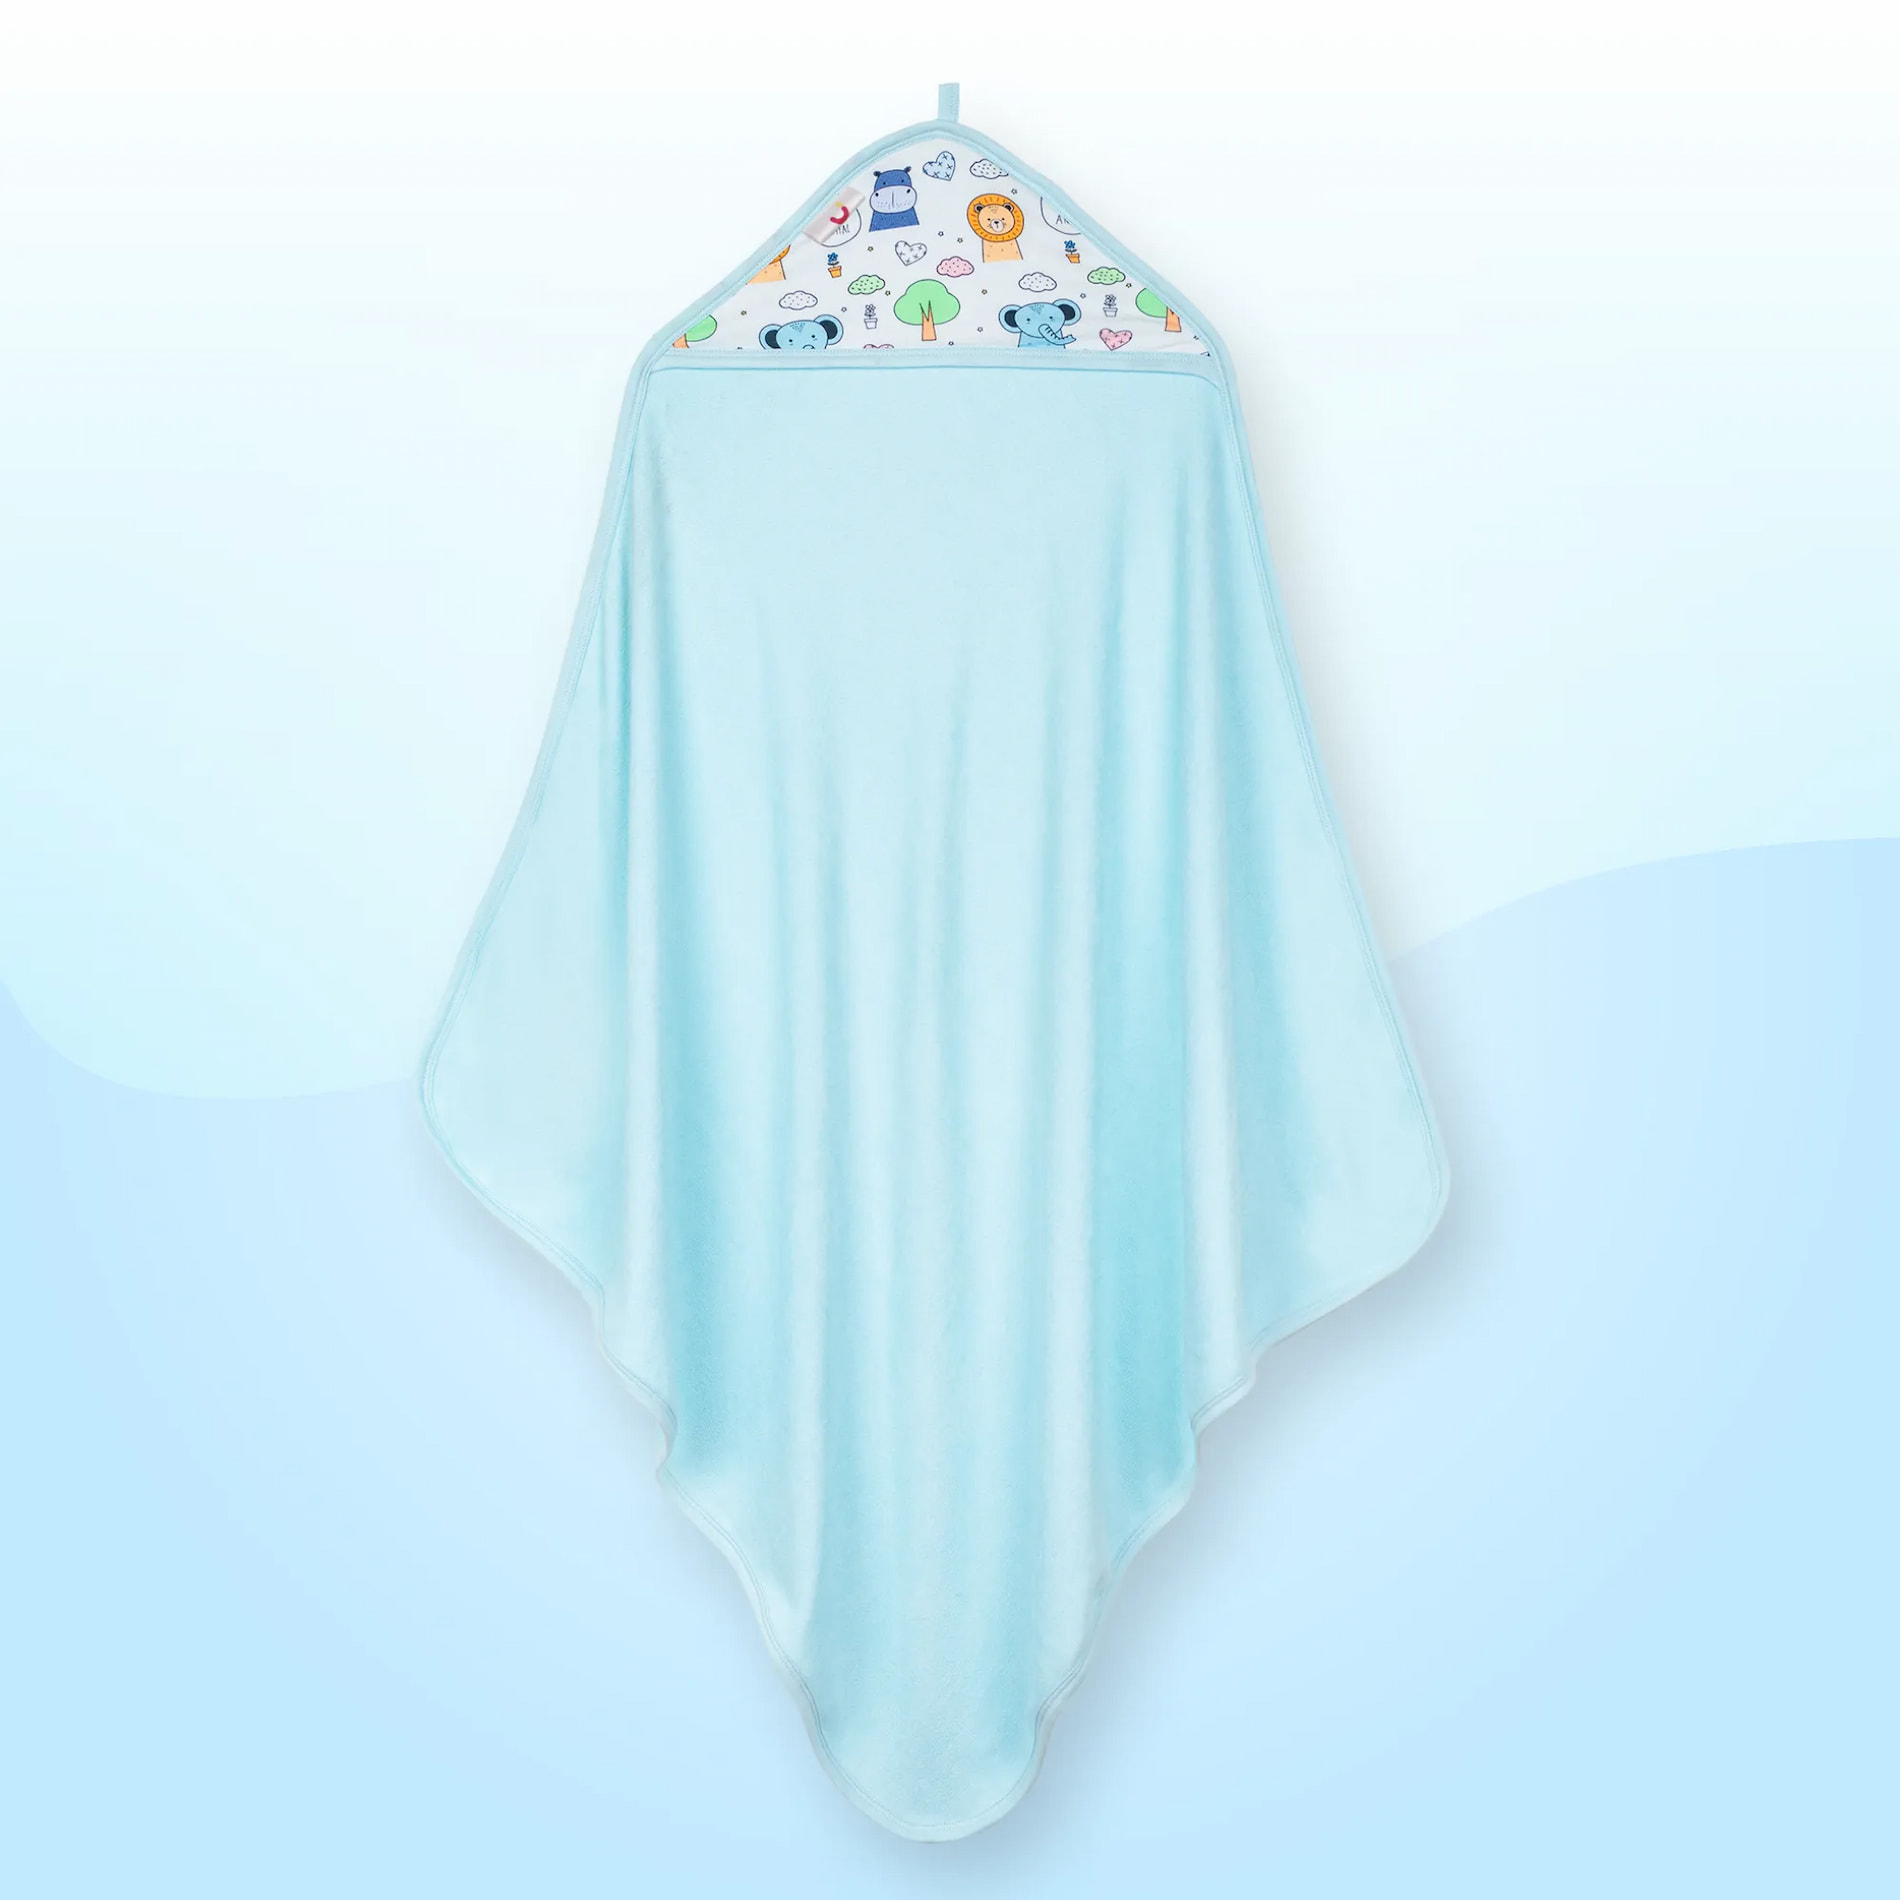 Baby Hooded Towel | Soft, Lightweight & Extra Absorbent |Keeps Baby Snug | Dries 3x Faster than Cotton | Baby Safari - Blue (78 cm x 78cm)